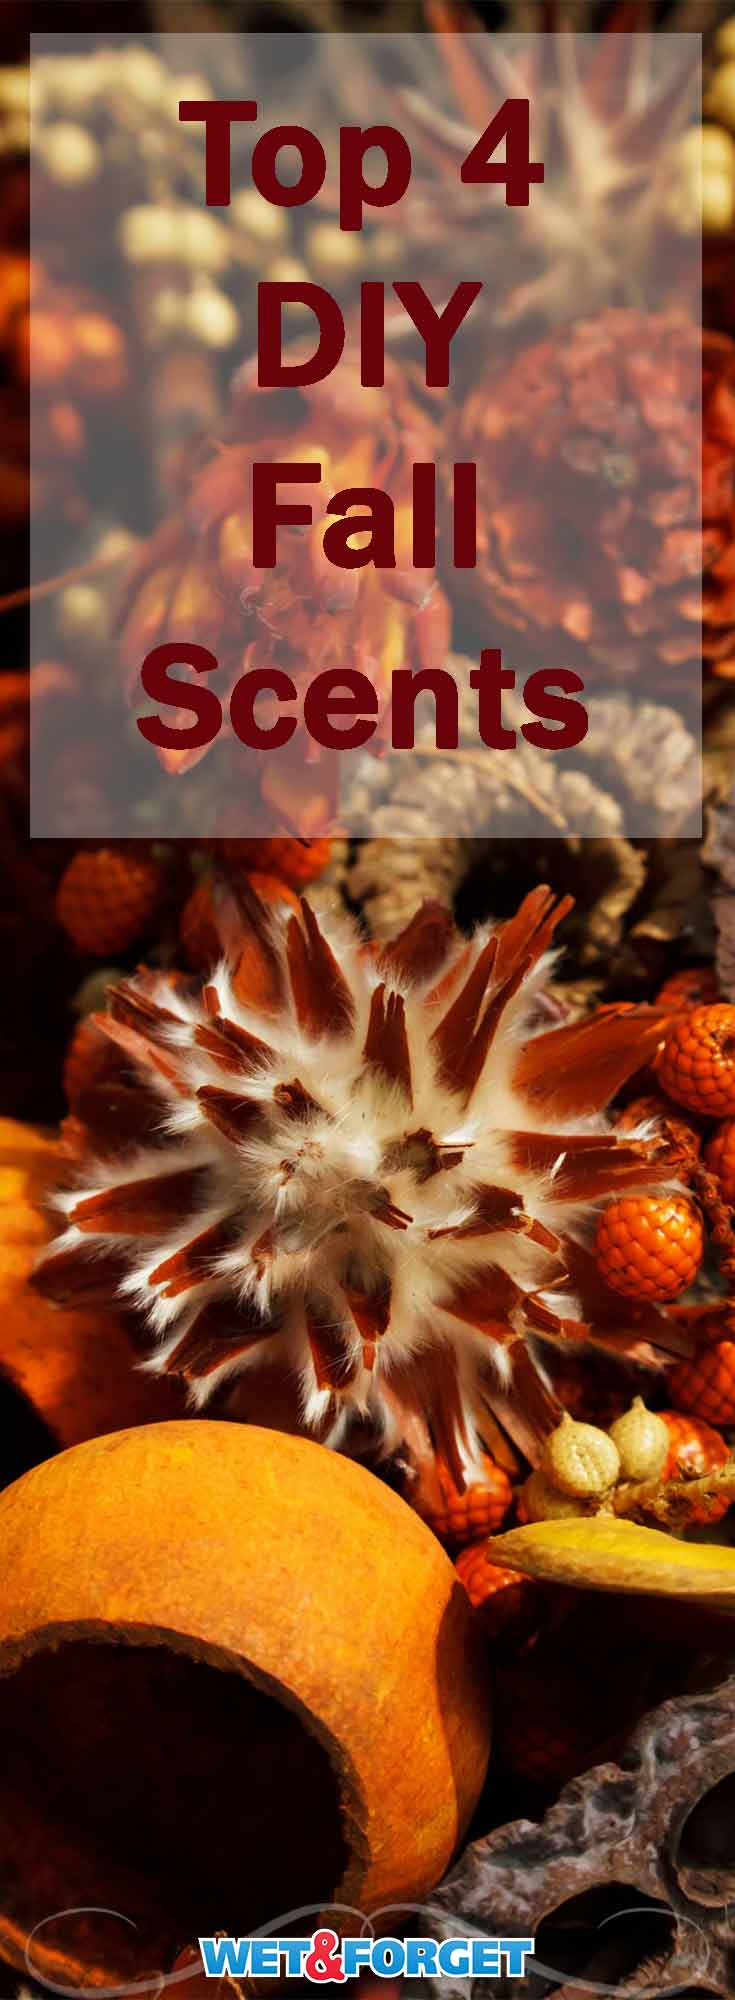 Celebrate the season with these festive fall DIY scents!